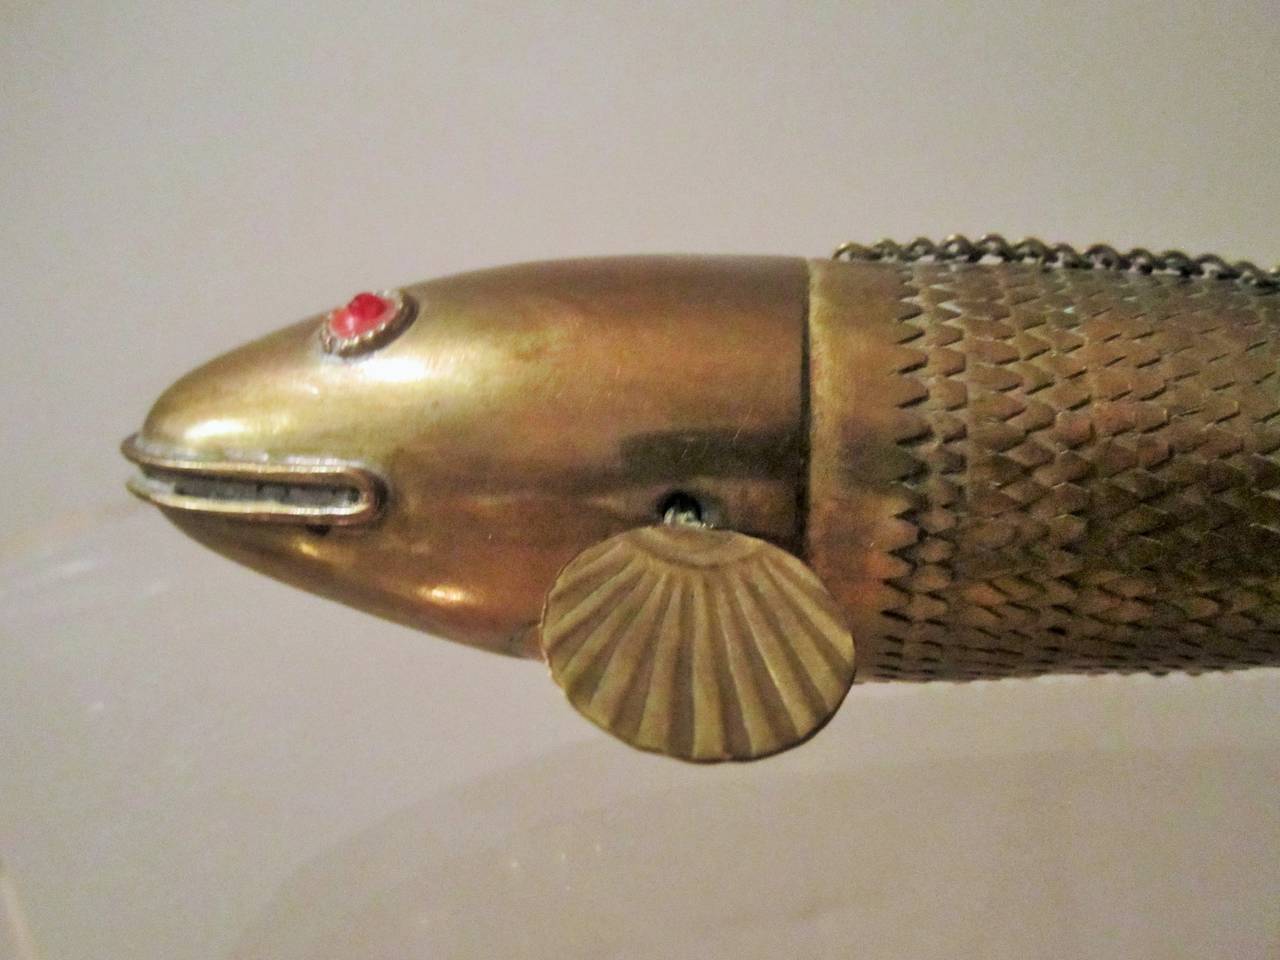 A unique vintage Mid-Century Japanese articulating or kinetic brass koi fish sculpture with ruby-like red eyes. Measures 10.5